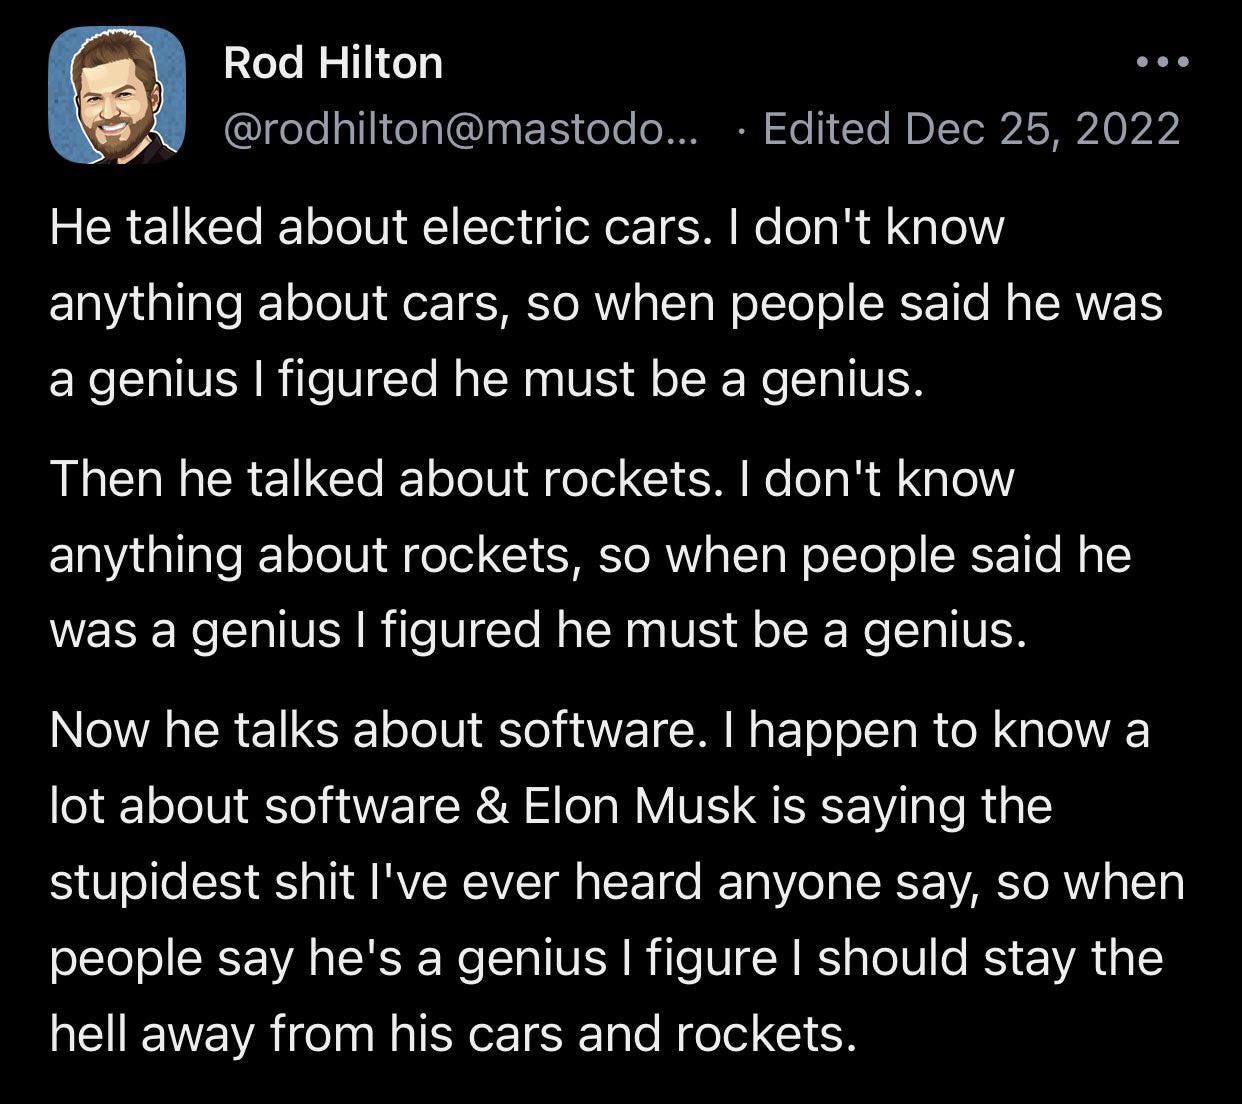 He talked about electric cars. I don't know anything about cars, so when people said he was a genius I figured he must be a genius. Then he talked about rockets. I don't know anything about rockets, so when people said he was a genius I figured he must be a genius. Now he talks about software. I happen to know a lot about software & Elon Musk is saying the stupidest shit I've ever heard anyone say, so when people say he's a genius I figure I should stay the hell away from his cars and rockets.